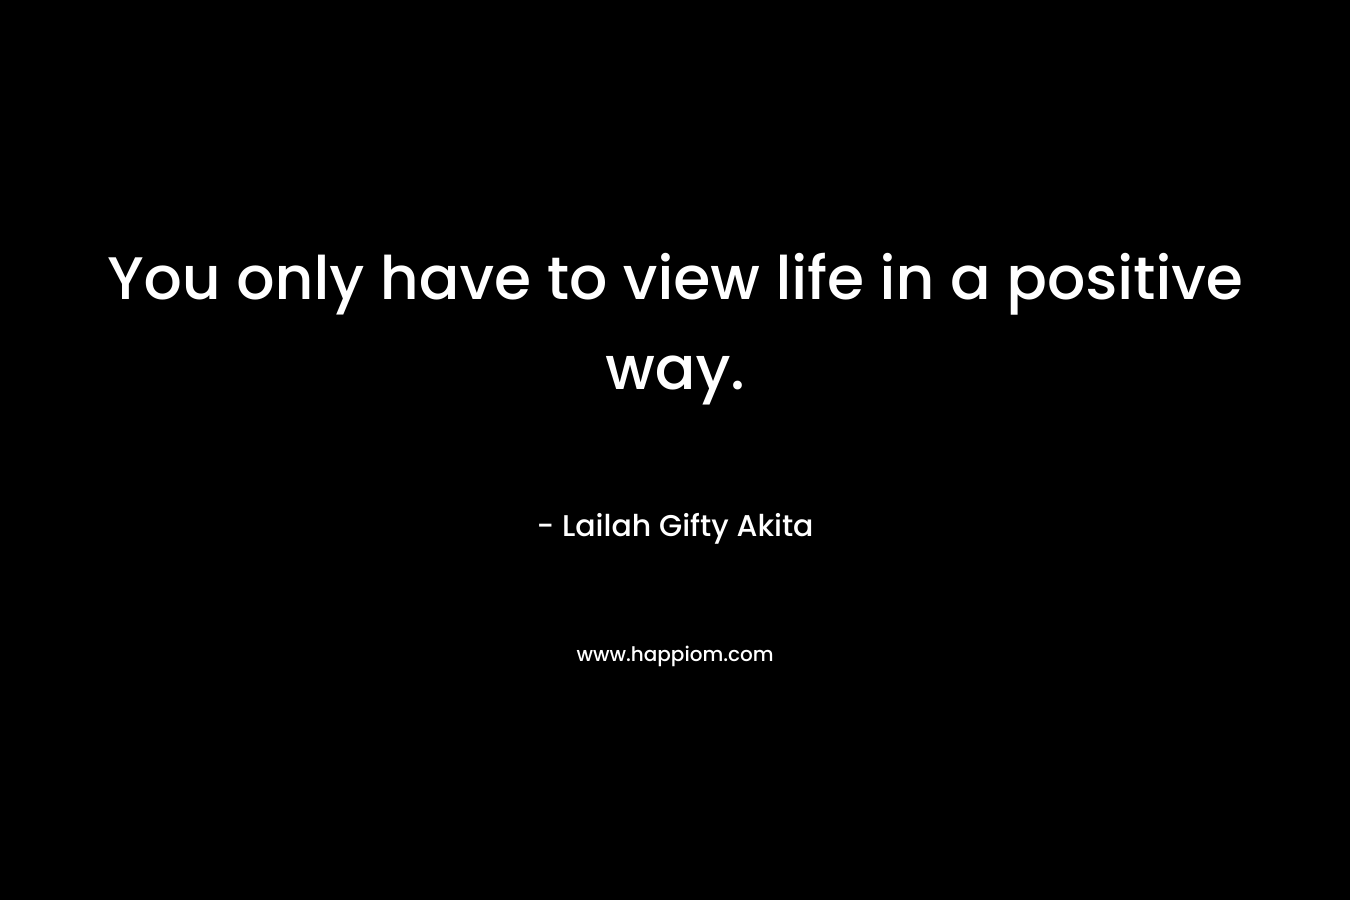 You only have to view life in a positive way.